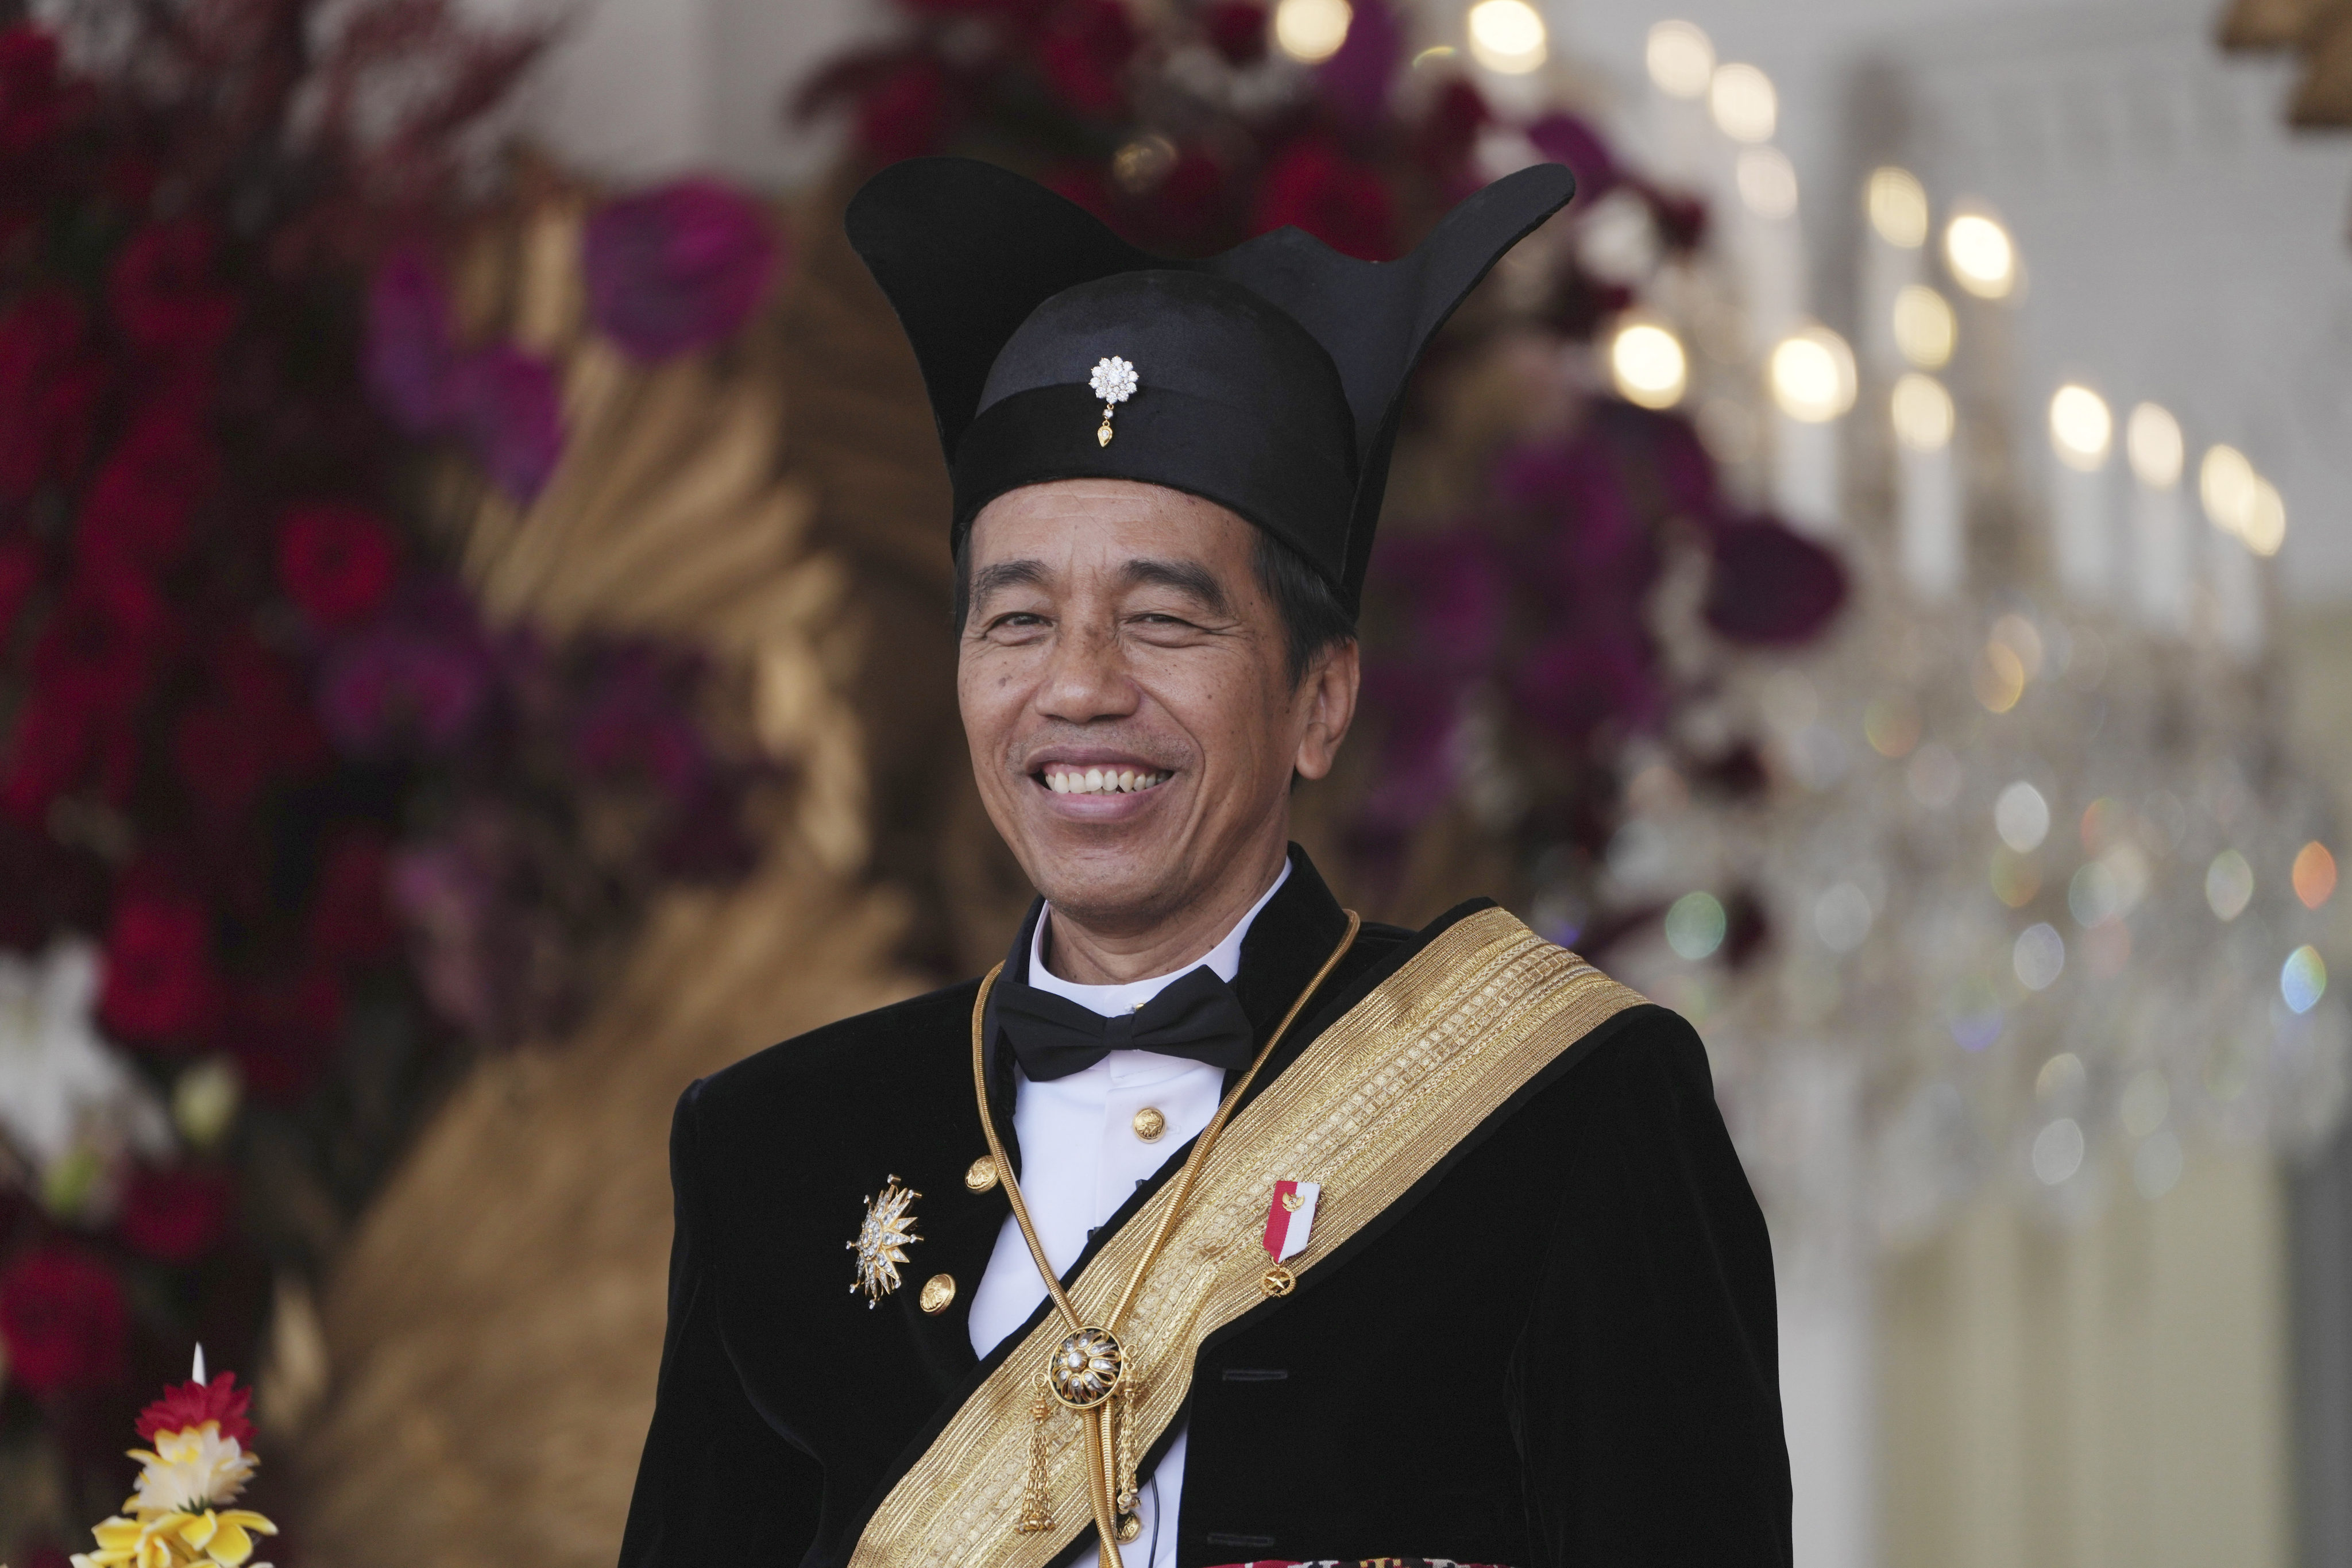 Indonesian President Joko Widodo is attending the Brics summit in South Africa, attending speculation that Southeast Asia’s largest economy could become the newest member of the bloc. Photo: AP